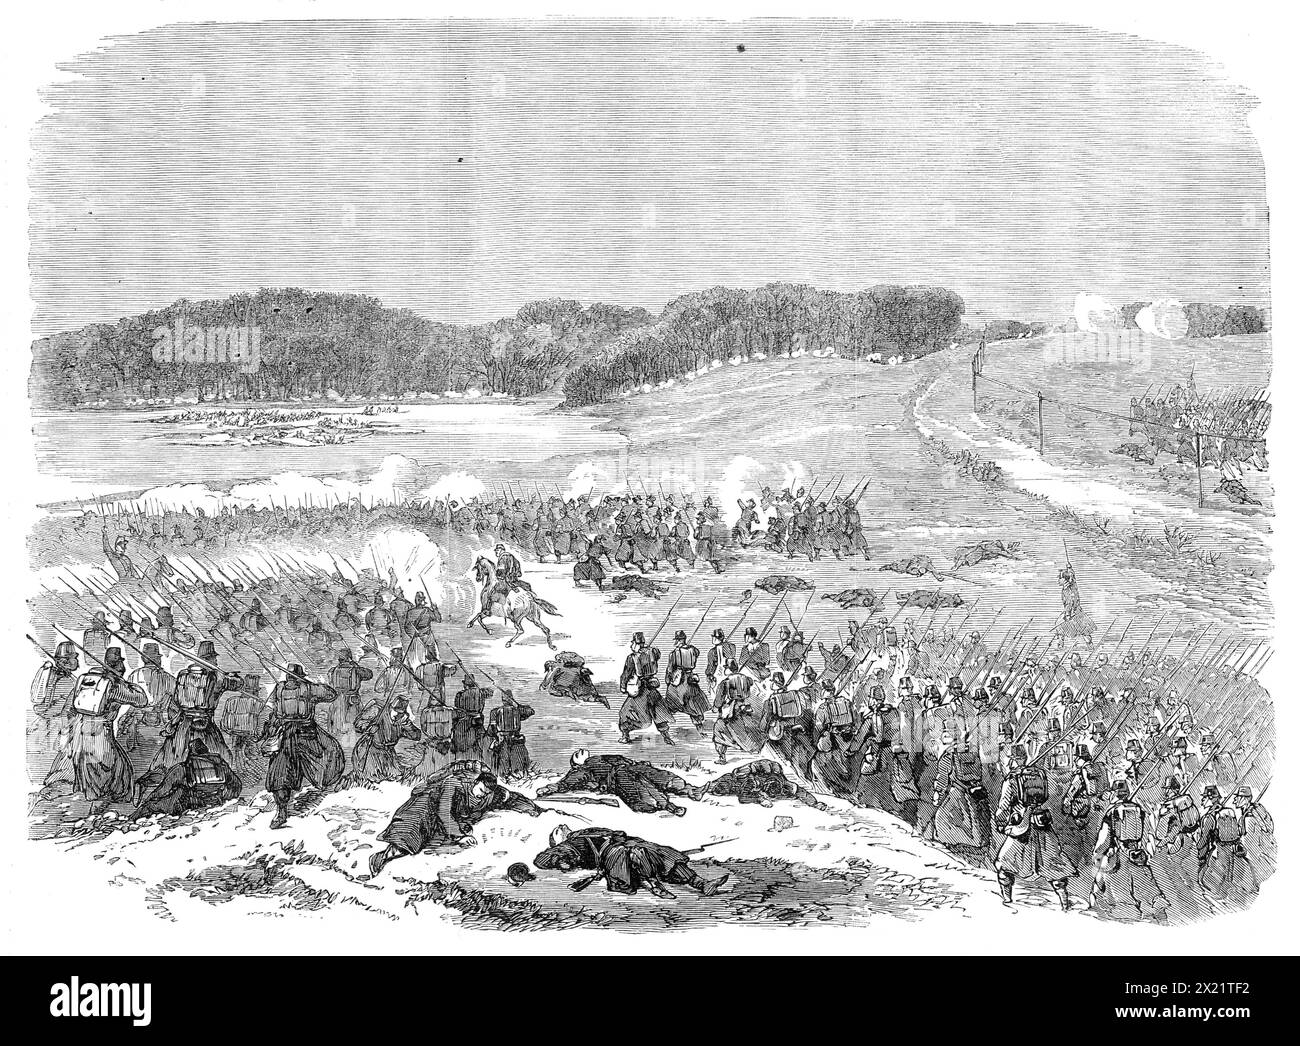 Illustrations of the War in Schleswig by our special artist: the Battle of Oversee, 1864. 'The allies having crossed the Schlei and entered the town of Schleswig at an early hour on Saturday morning, Eeb. 6, they lost no time in pursuing the Danish army, which was in full retreat to Flensburg...The Nostitz Brigade lost altogether about 600 killed and wounded, a third of these being officers; Duke William of Wirtemberg had a portion of one foot shot away, and has since undergone amputation.General von Gablenz was personally in the thickest of the fight. After a protracted and desperate struggle Stock Photo